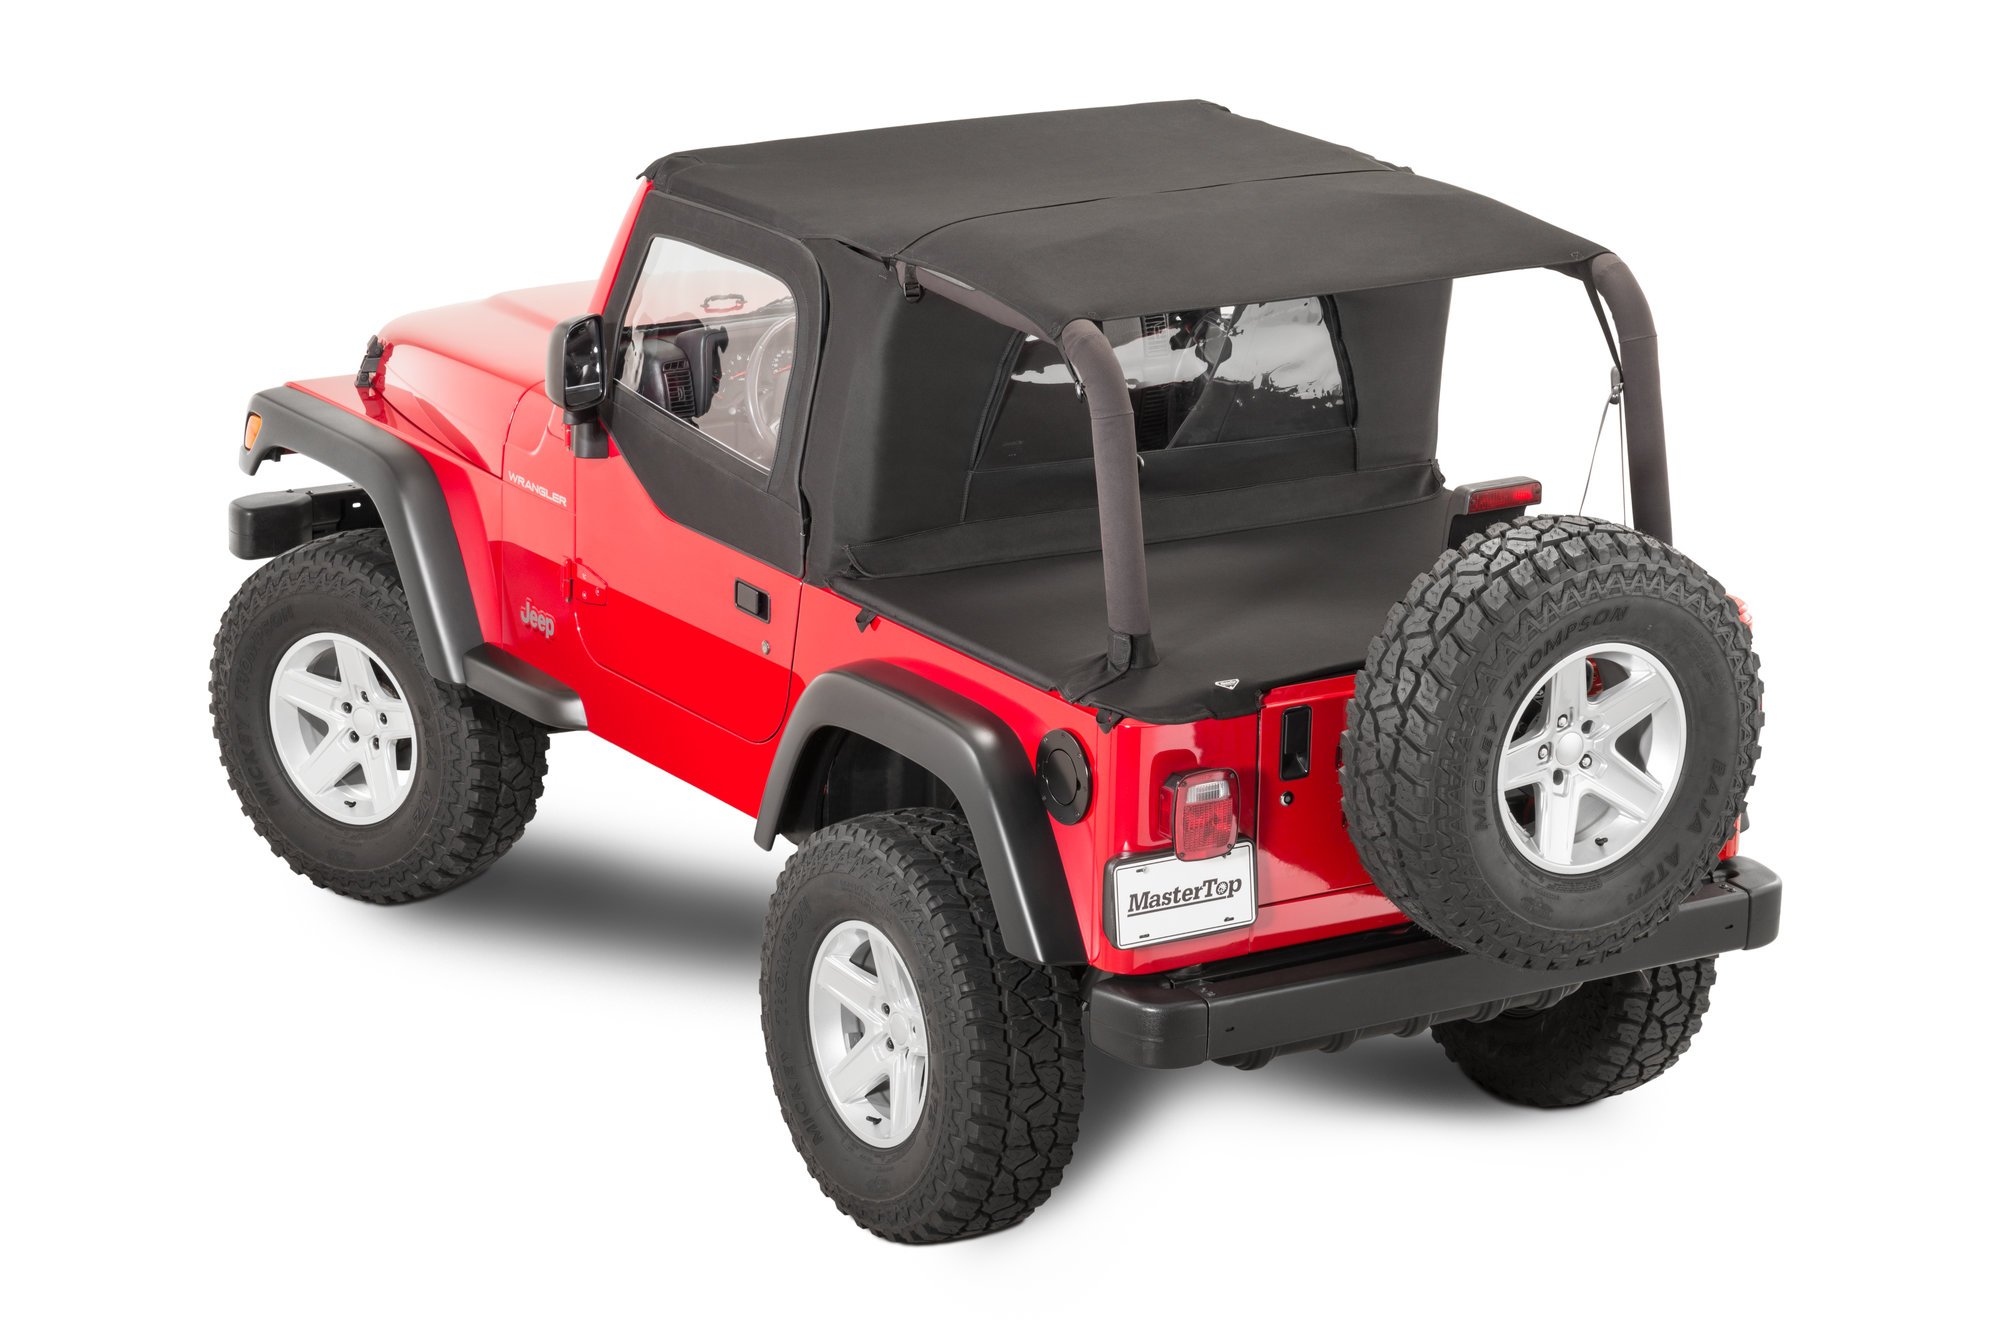 https://www.quadratec.com/sites/default/files/styles/product_zoomed/public/product_images/MSP-MasterTwill-Summer-Combo-Plus-with-upper-half-doors-97-02-jeep-tj.jpg